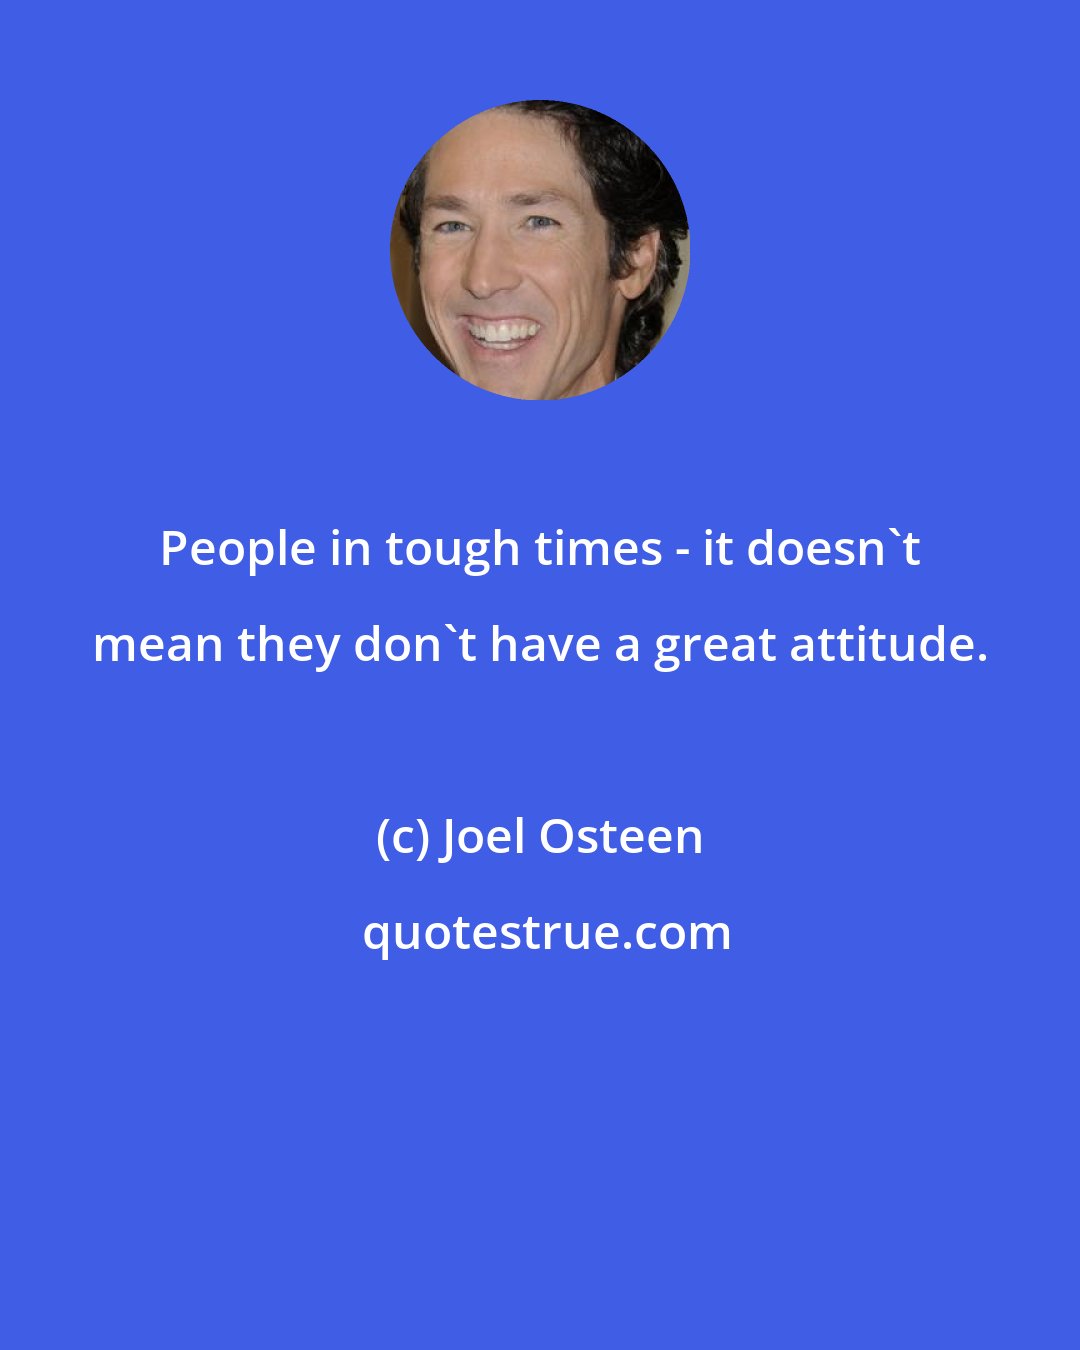 Joel Osteen: People in tough times - it doesn't mean they don't have a great attitude.